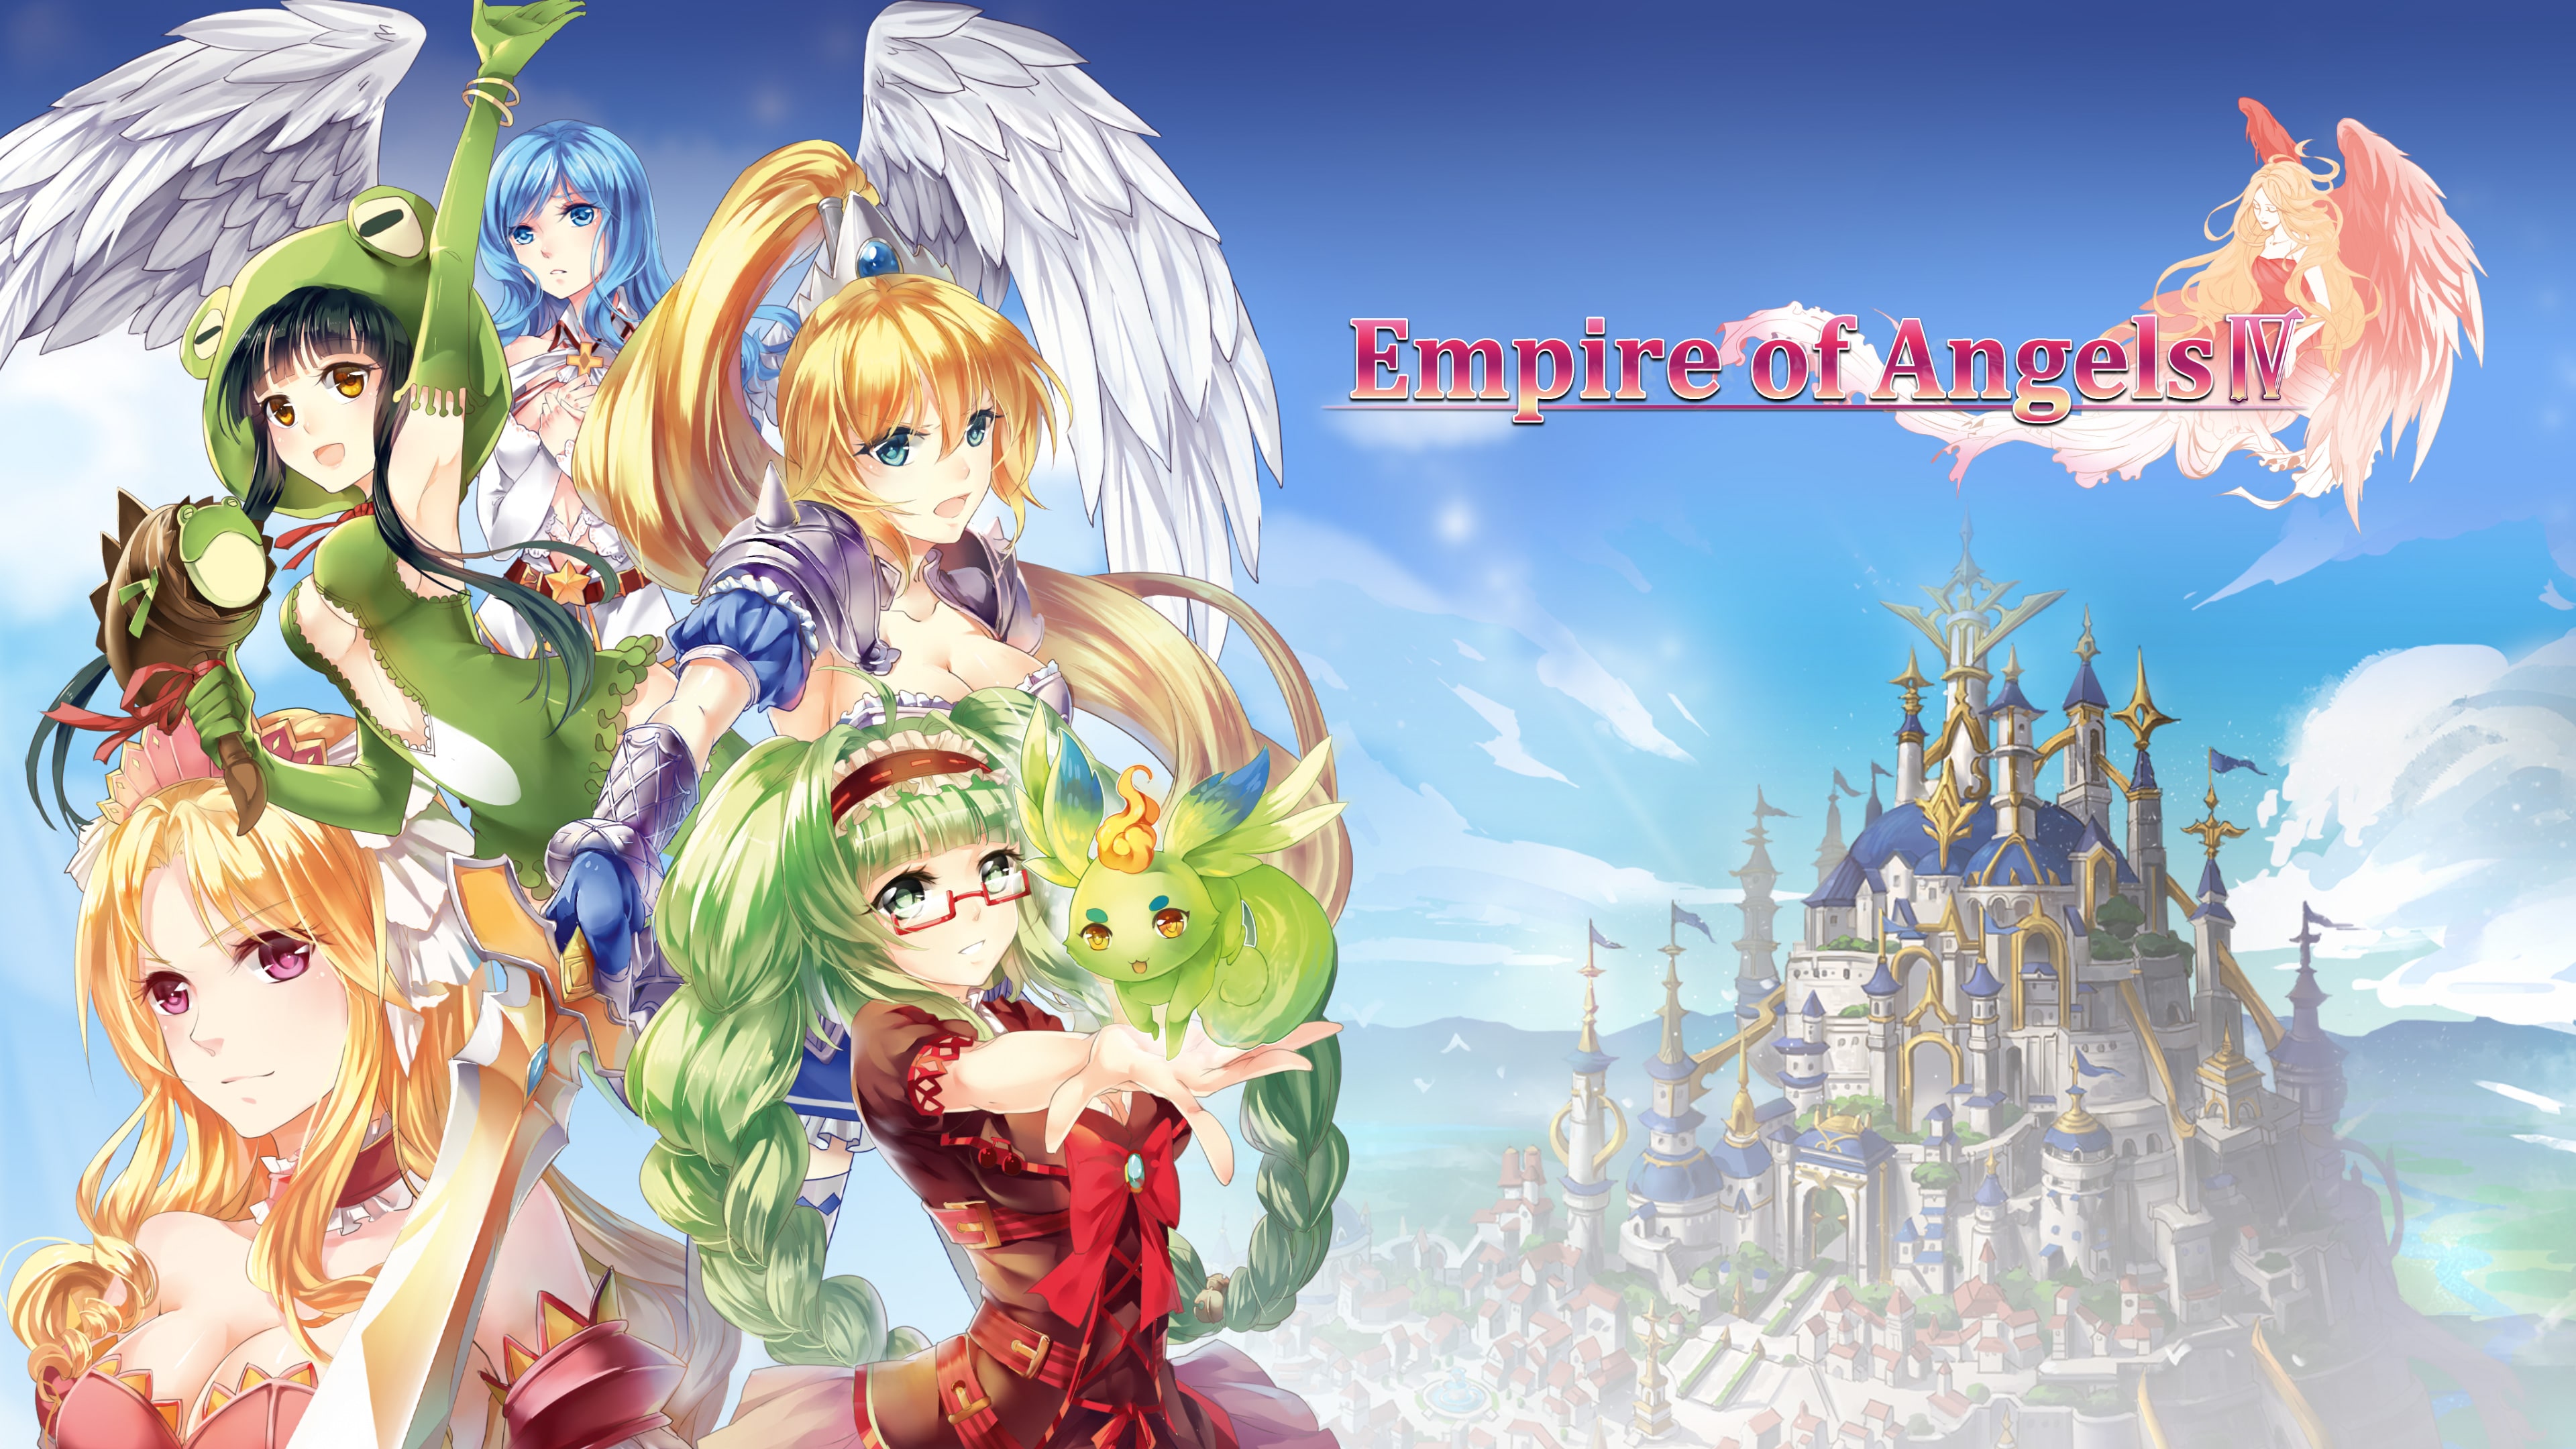 Empire of Angels IV (Simplified Chinese, English, Traditional Chinese)